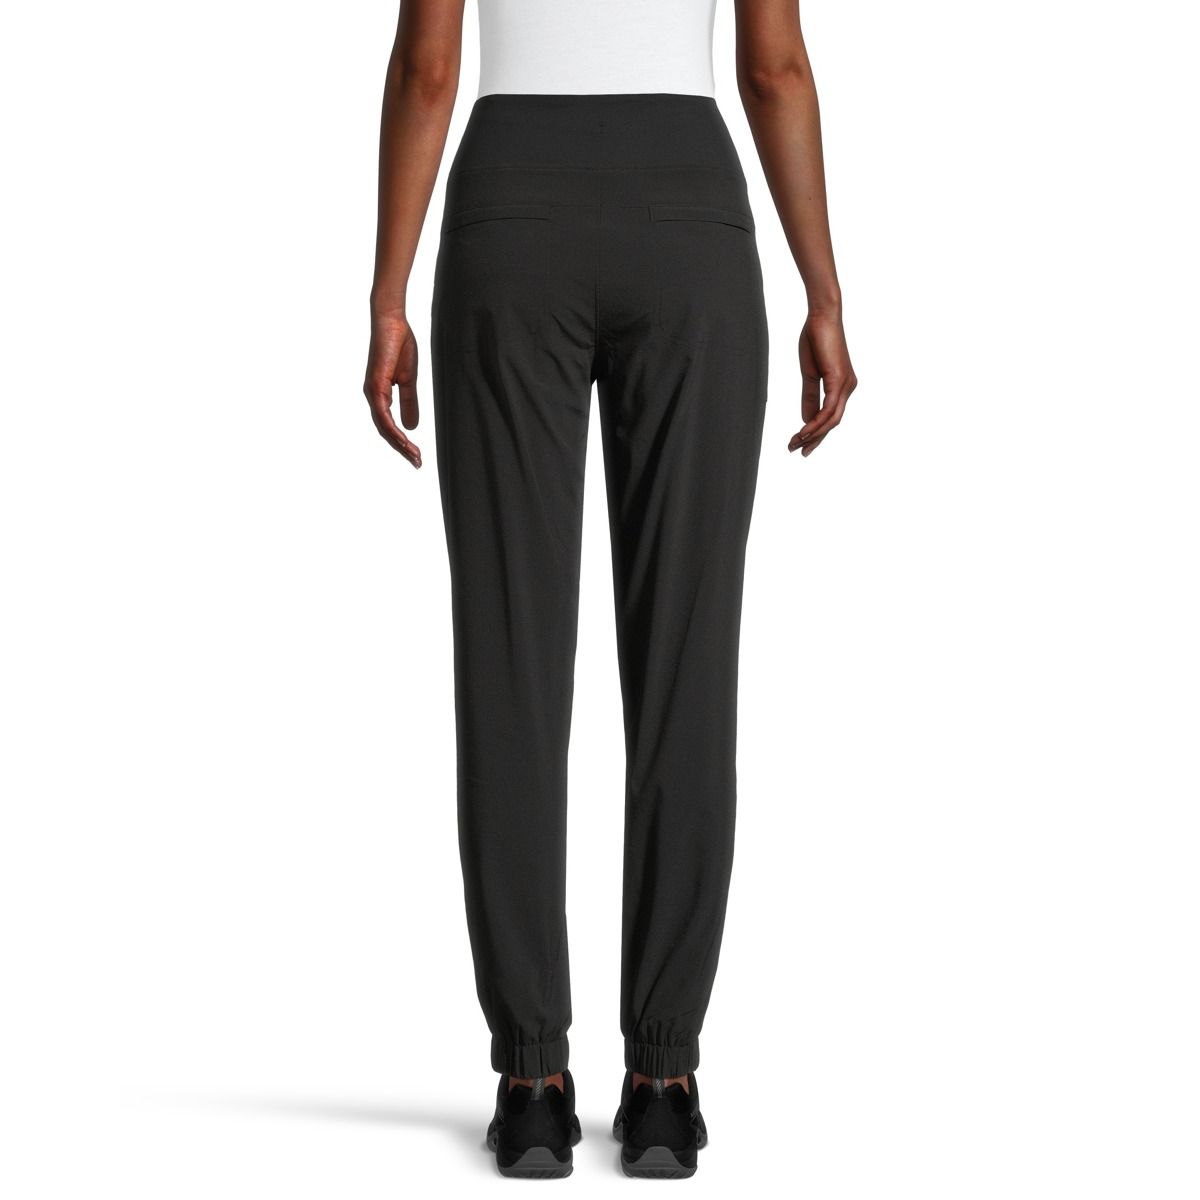 Women's Nine West High Rise Tapered Pants  Bottom clothes, Tapered pants,  Pants for women